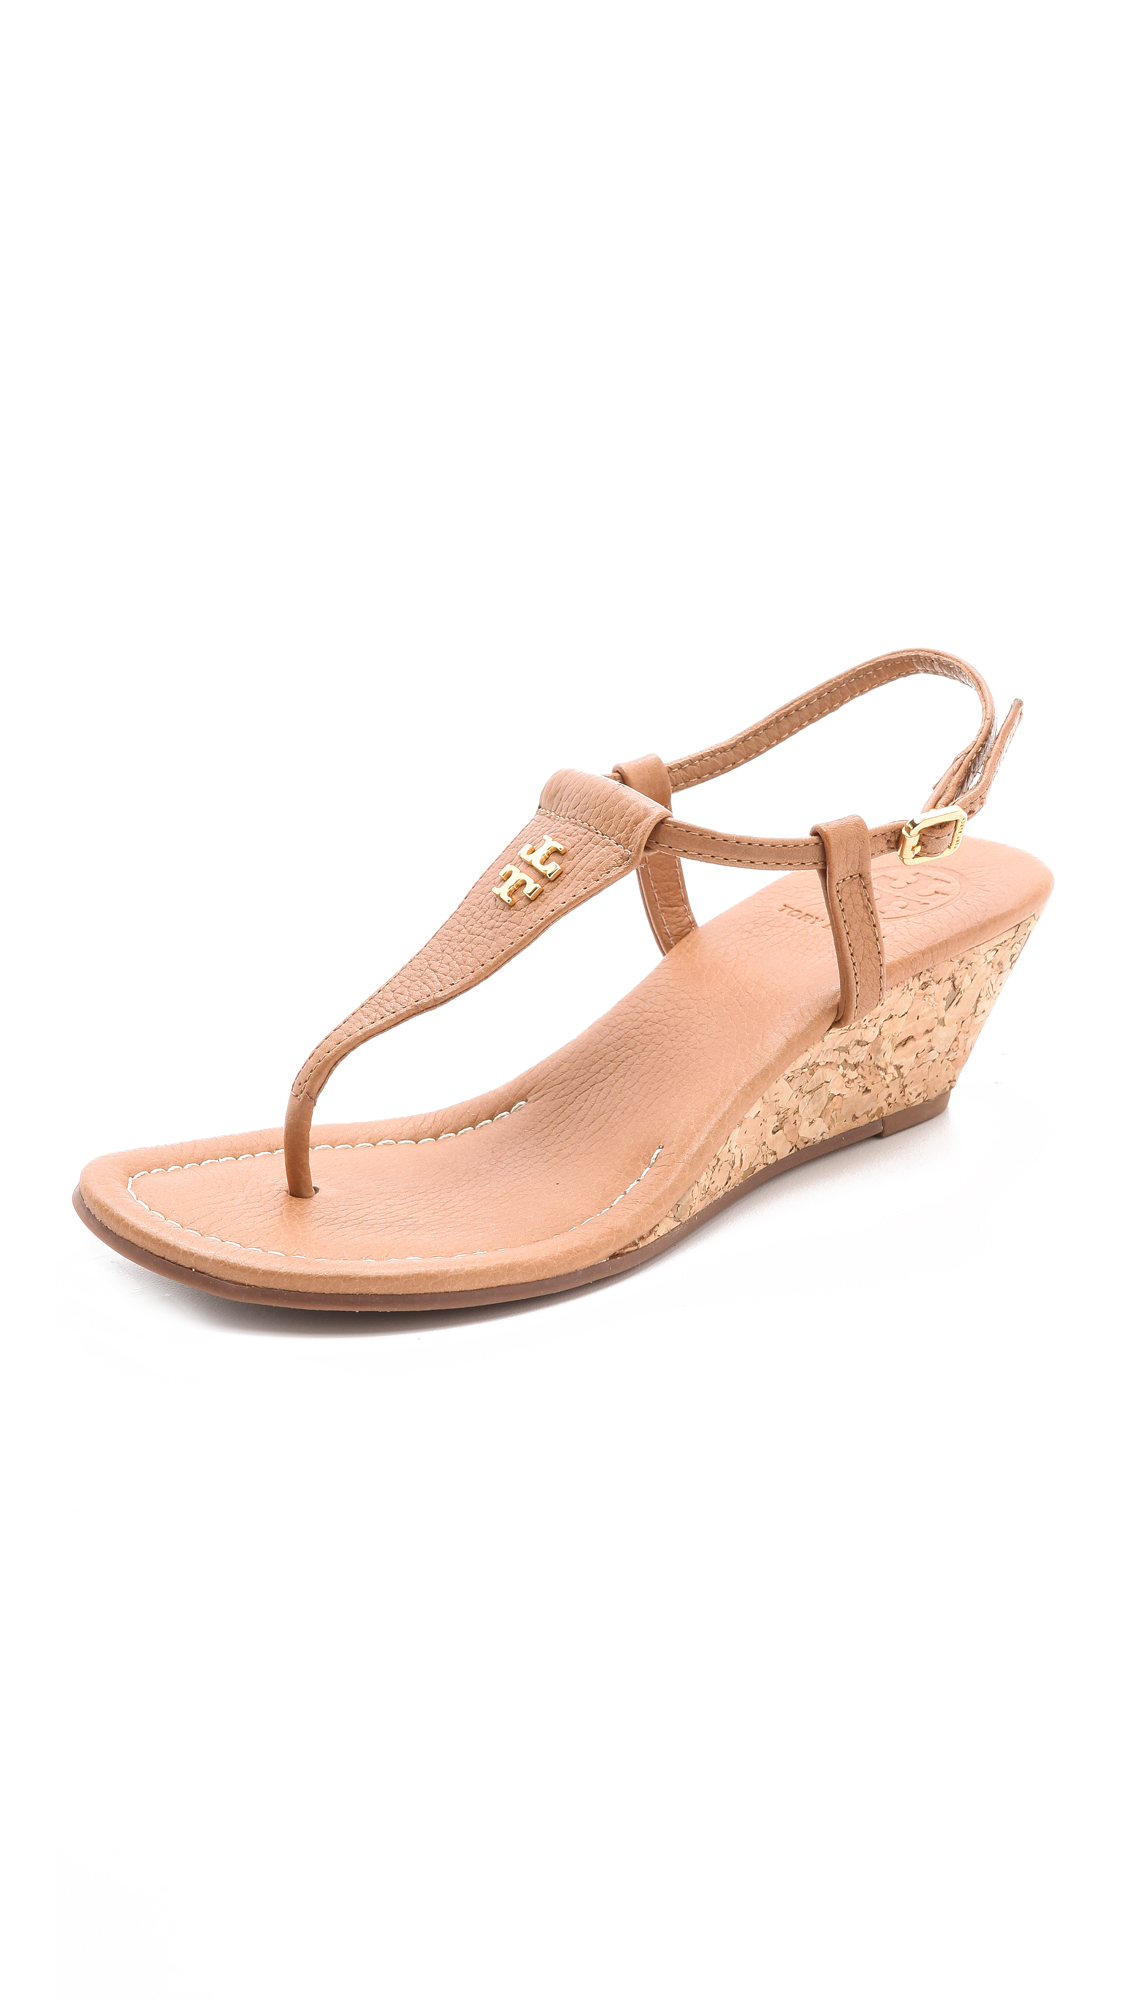 Tory Burch Britton Wedge Thong Sandals in Brown | Lyst